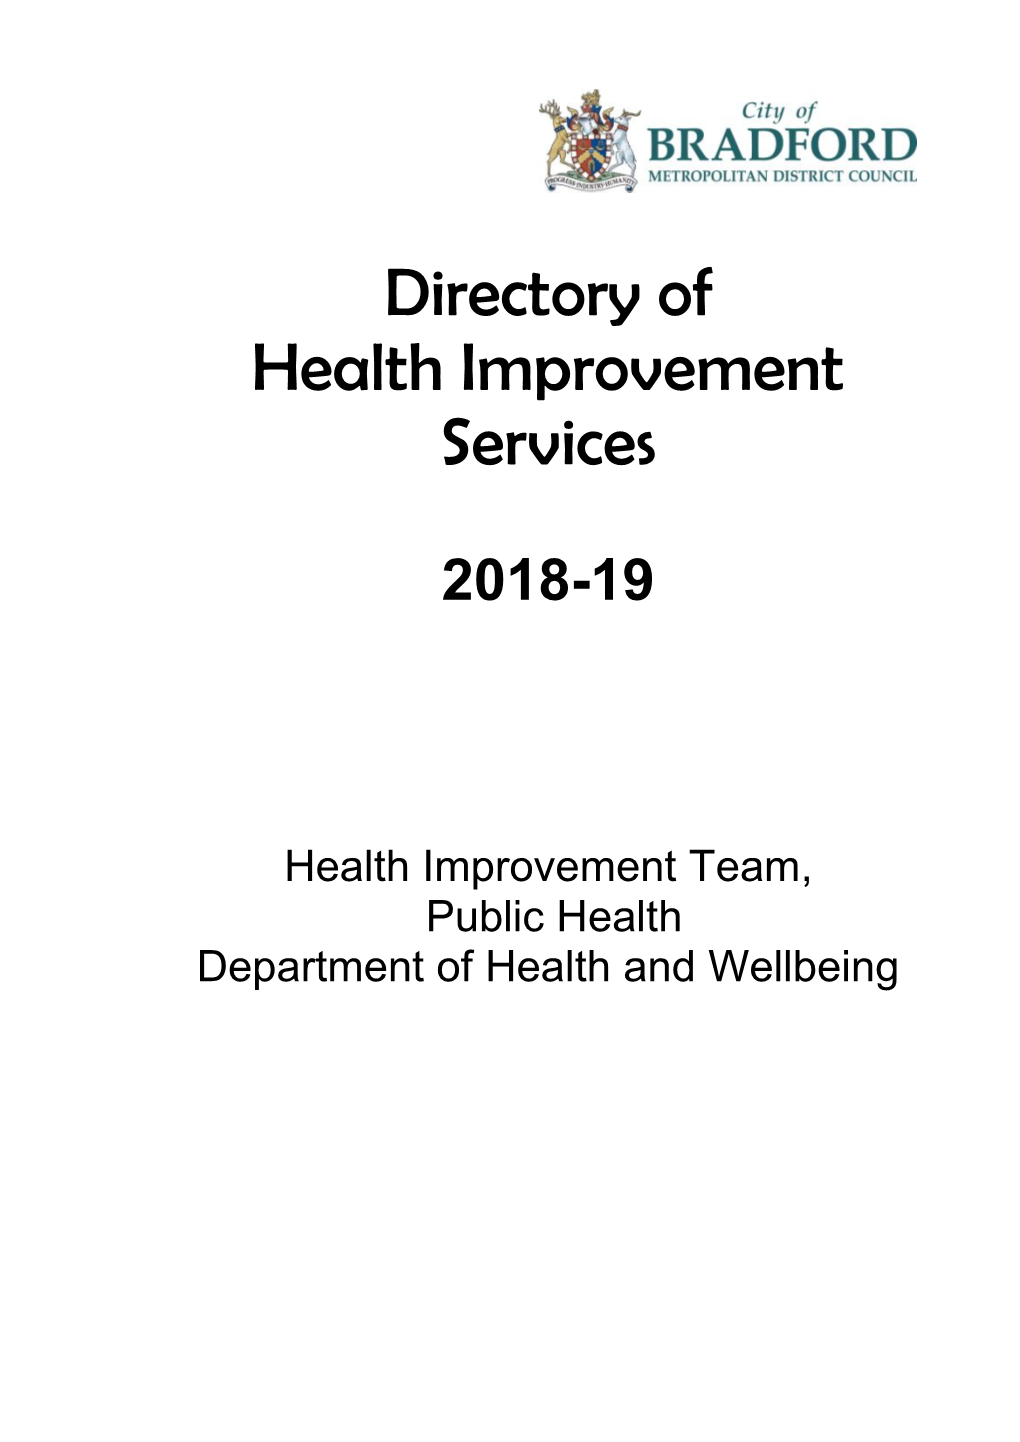 Directory of Health Improvement Services